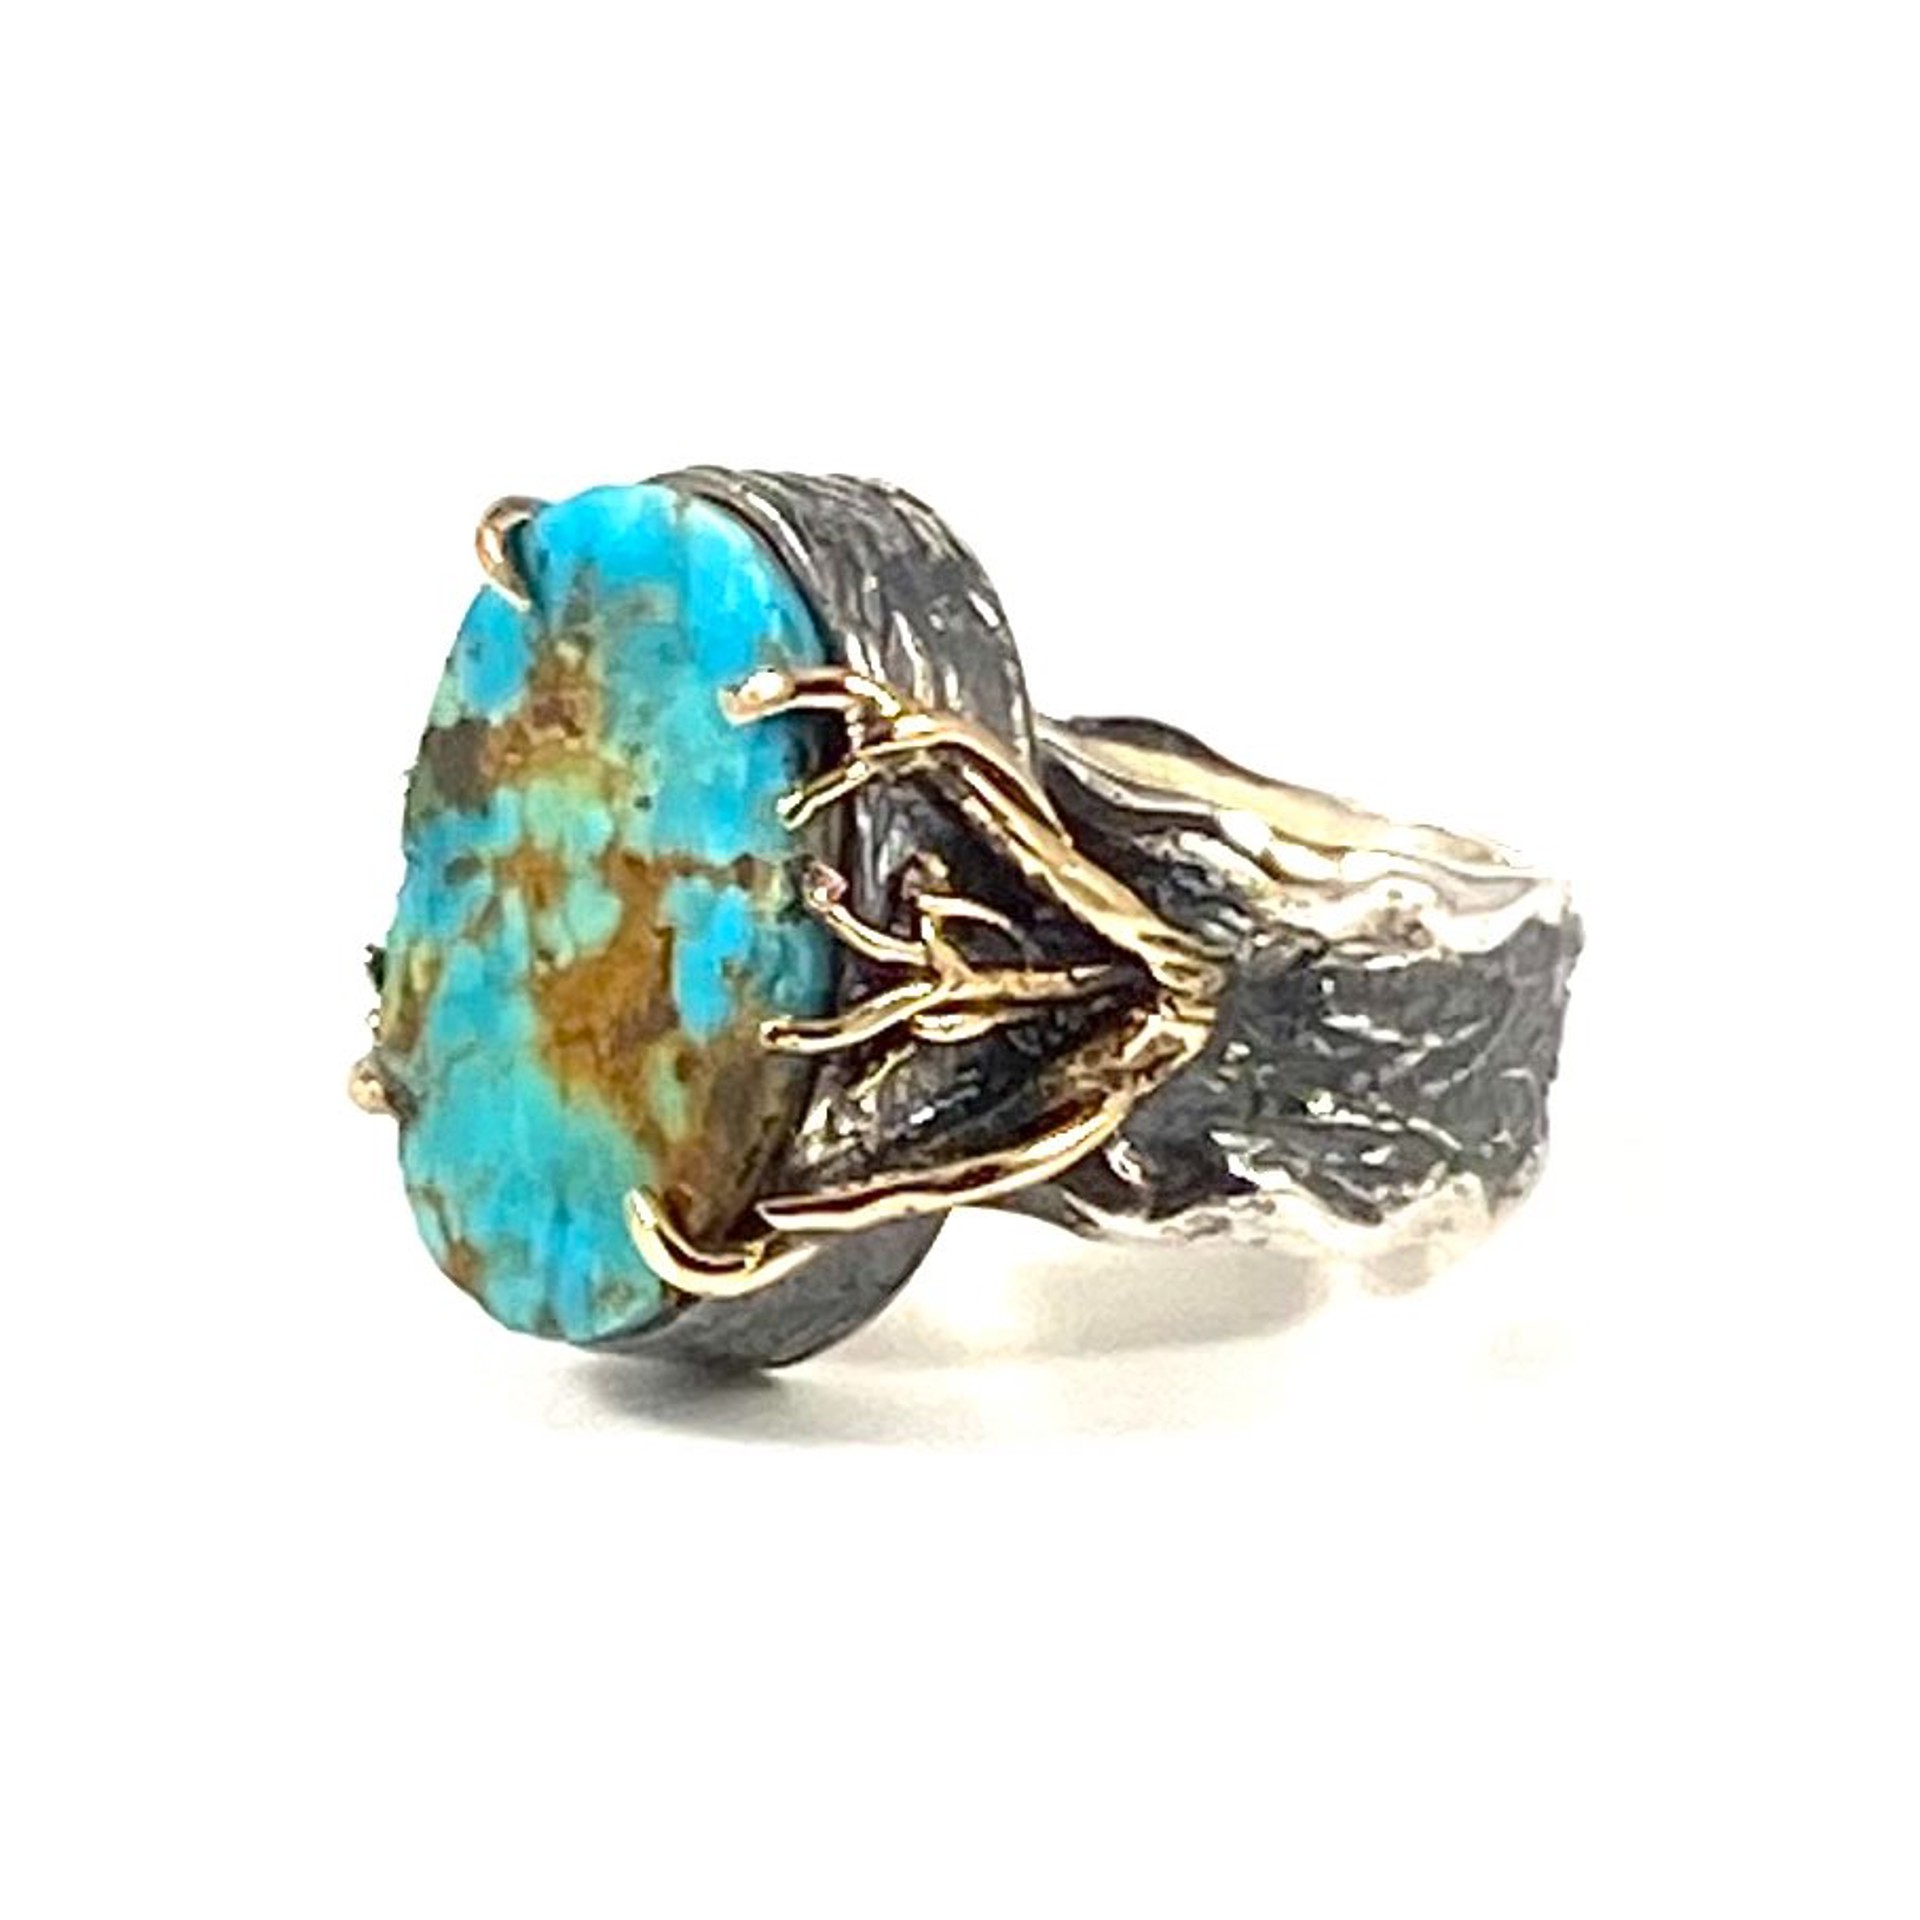 Dramatic Persian Turquois Oxidized Silver Band Ring sz10.5 by Bora